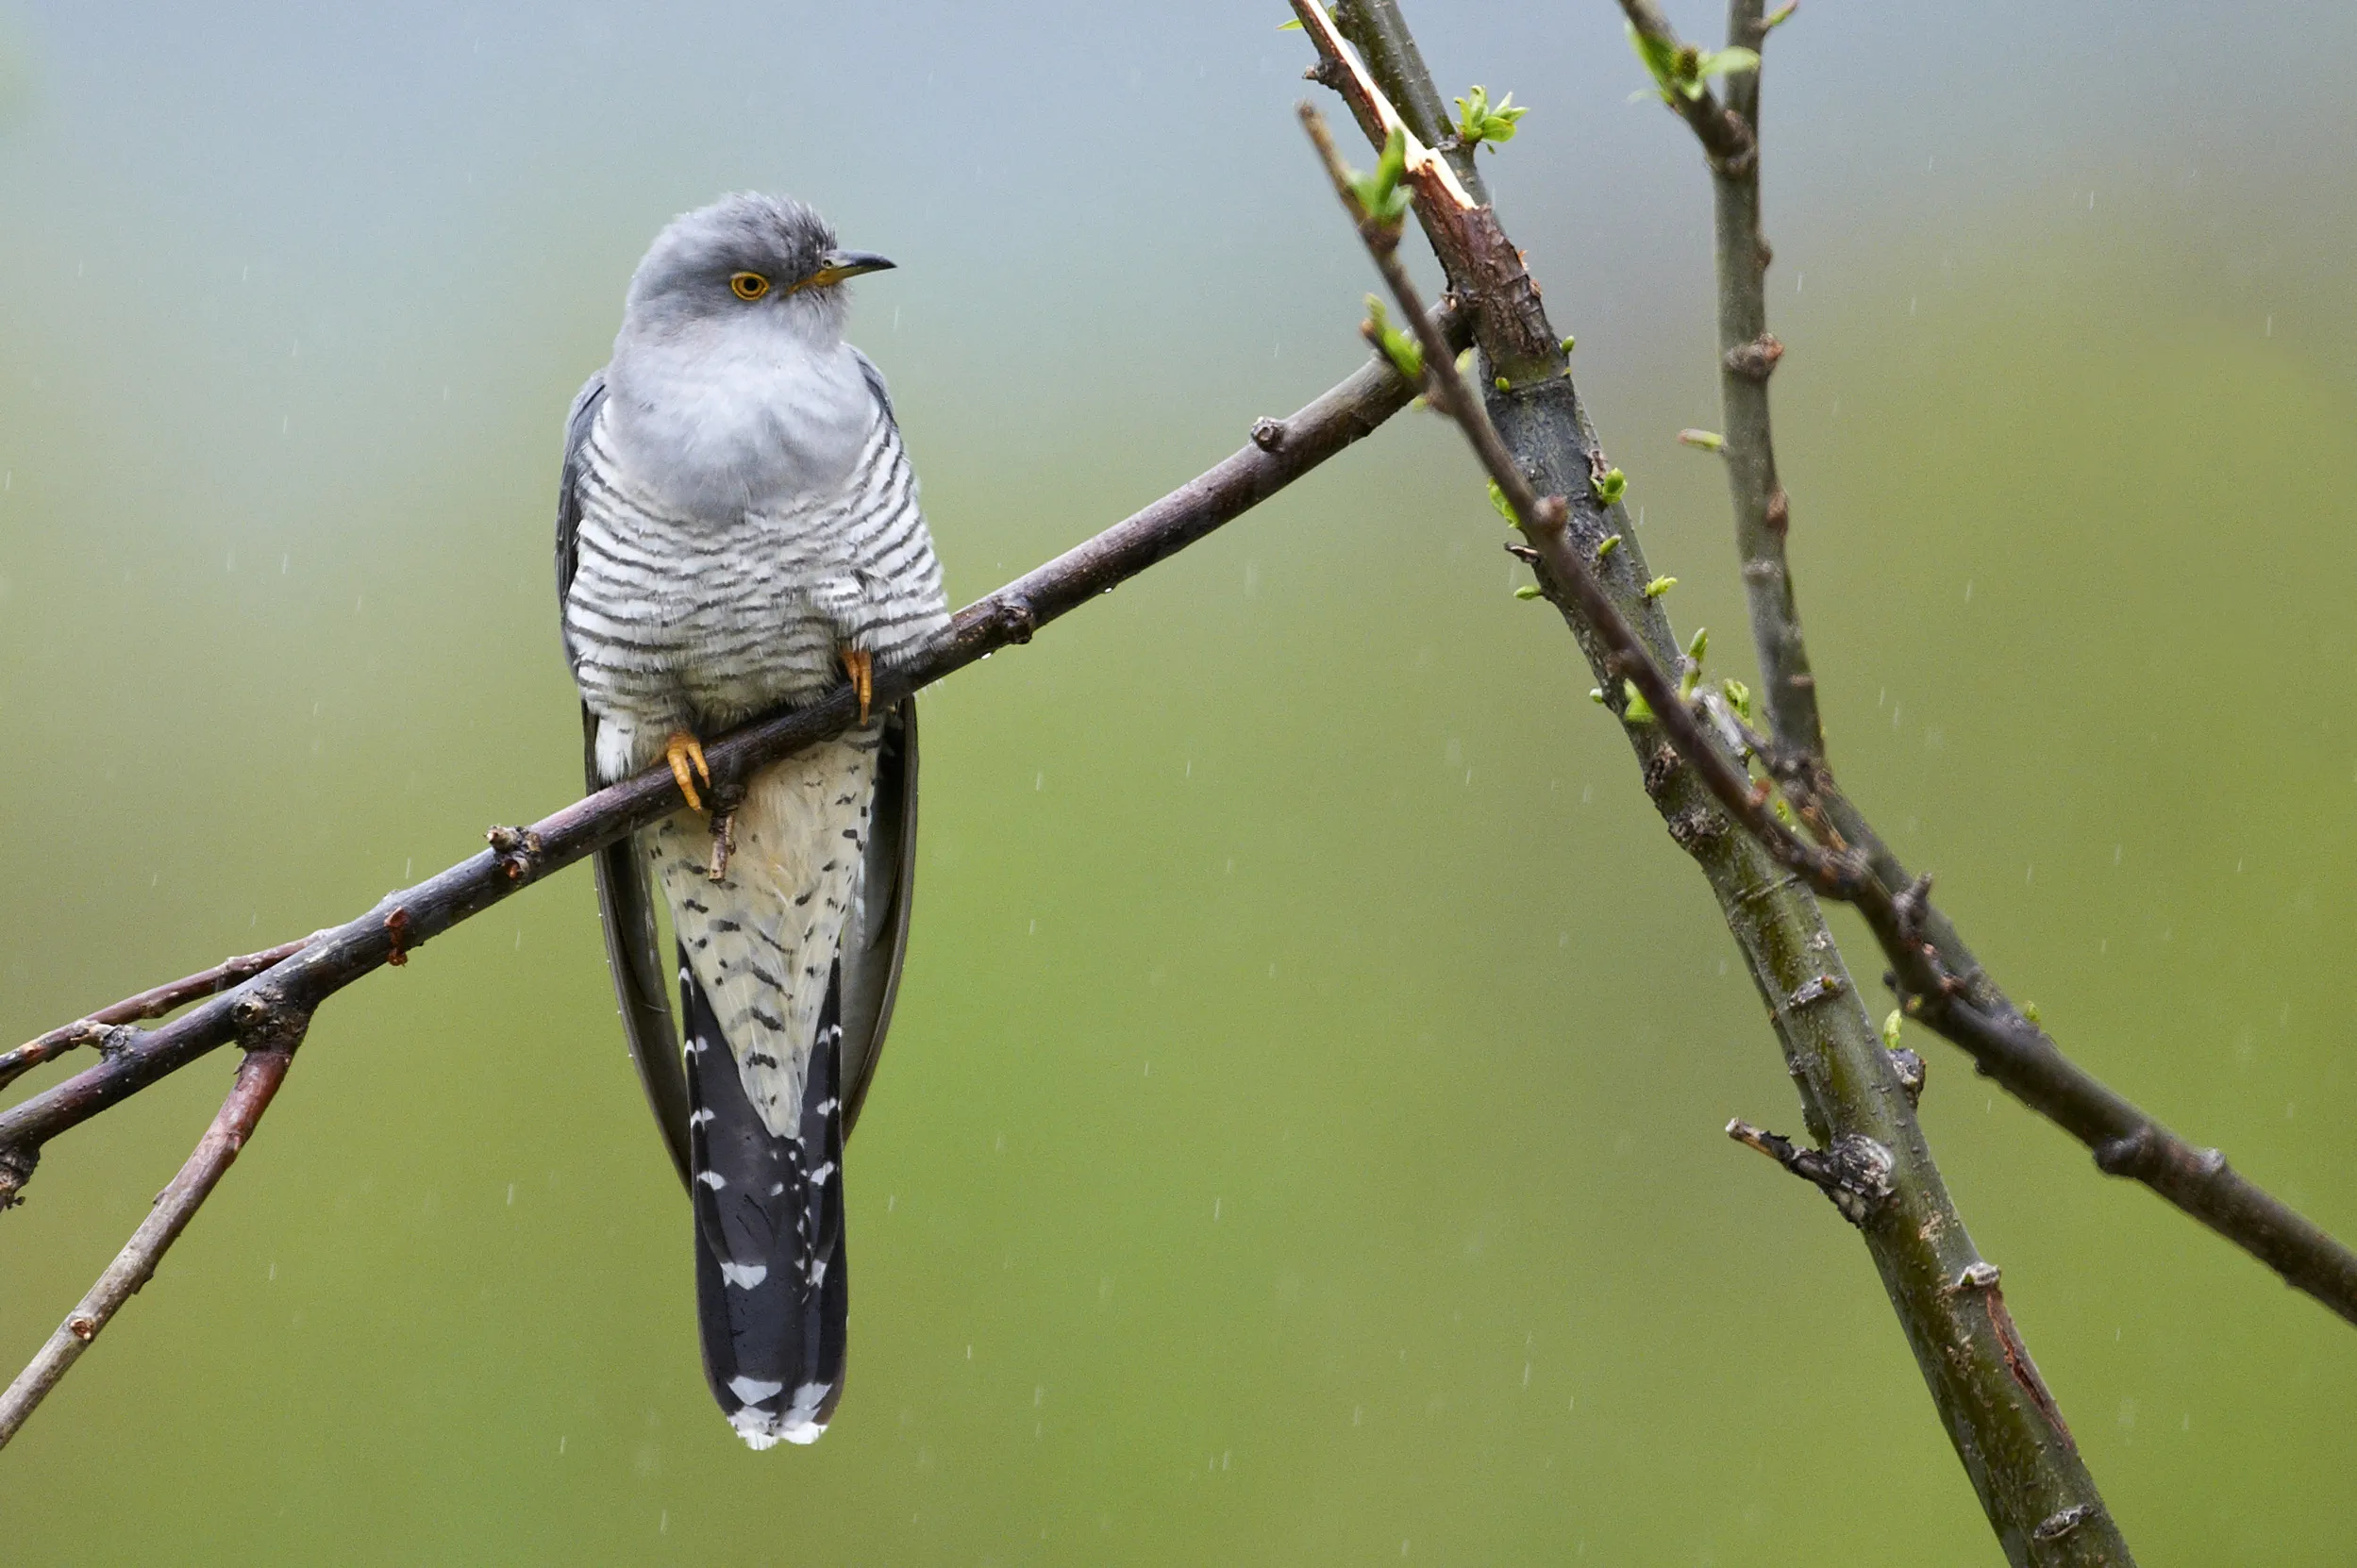 An adult Cuckoo perched amongst branches. 